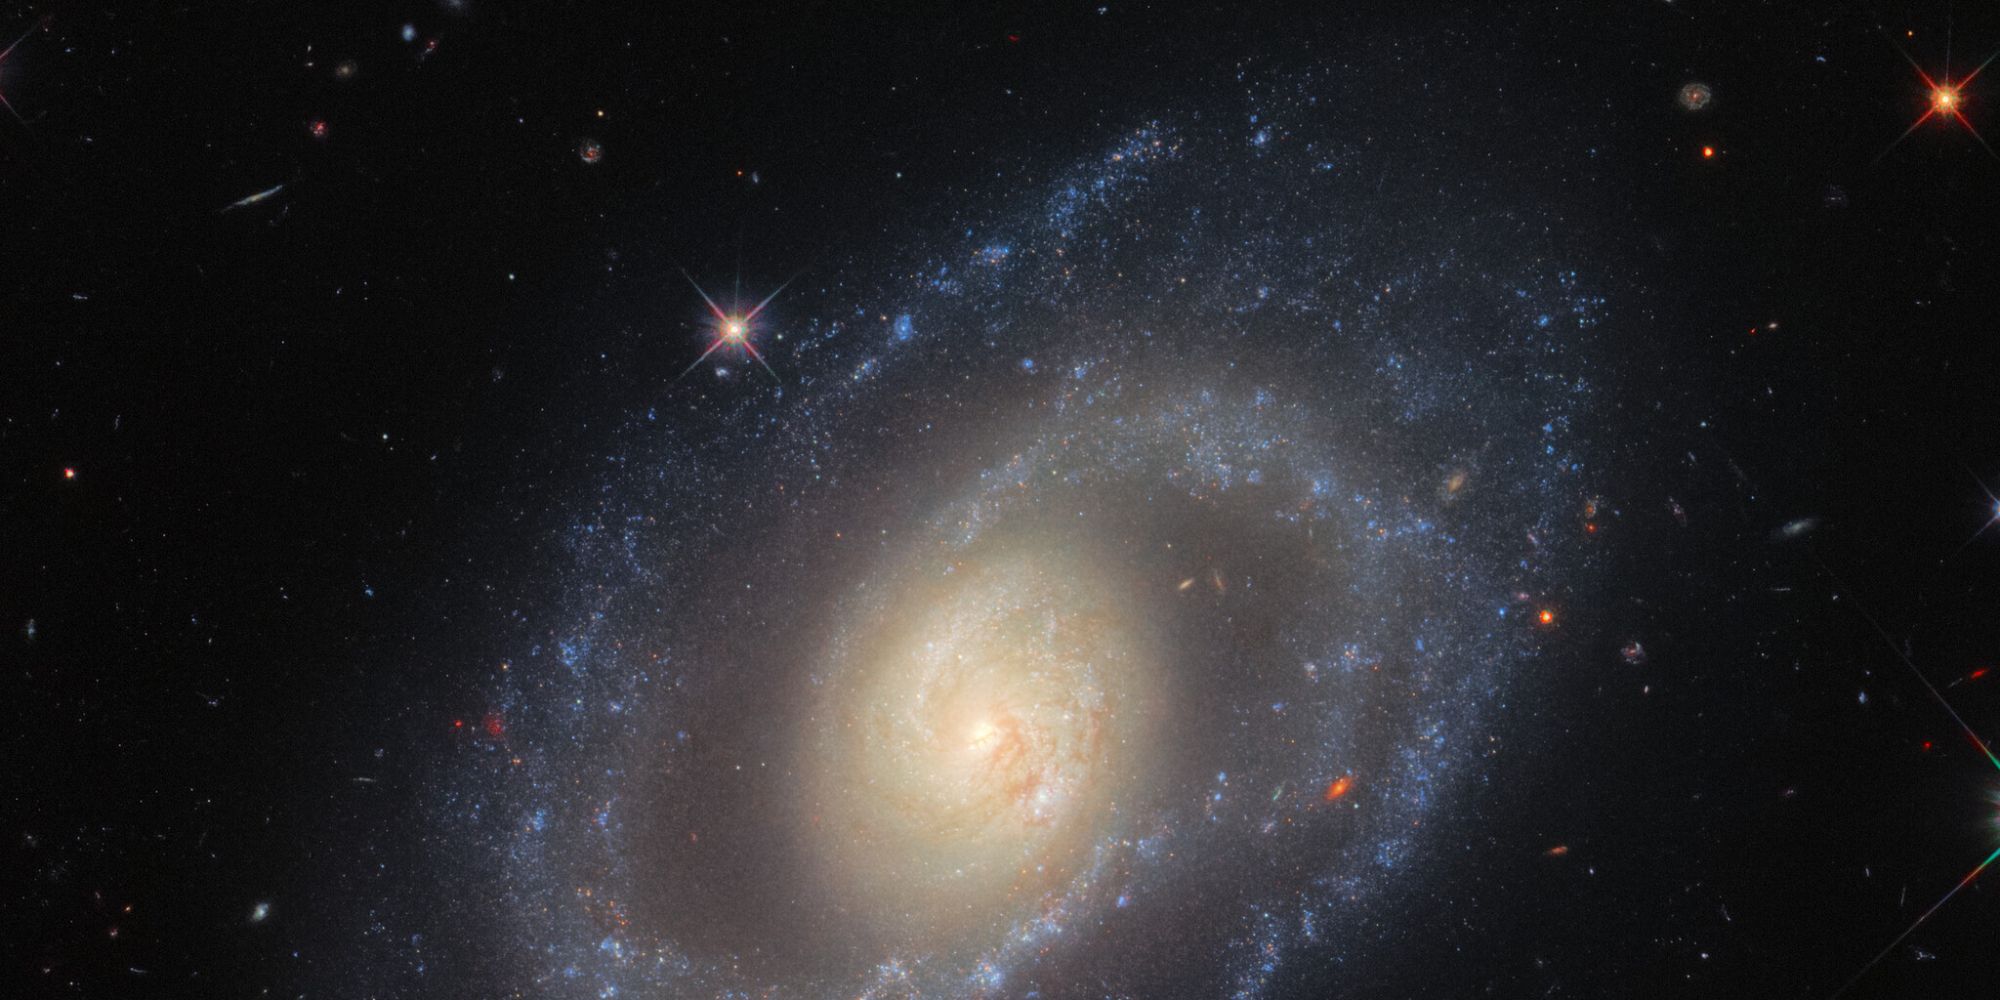 Hubble Looks At A Galaxy Millions Of LightYears Away In Stunning New Photo